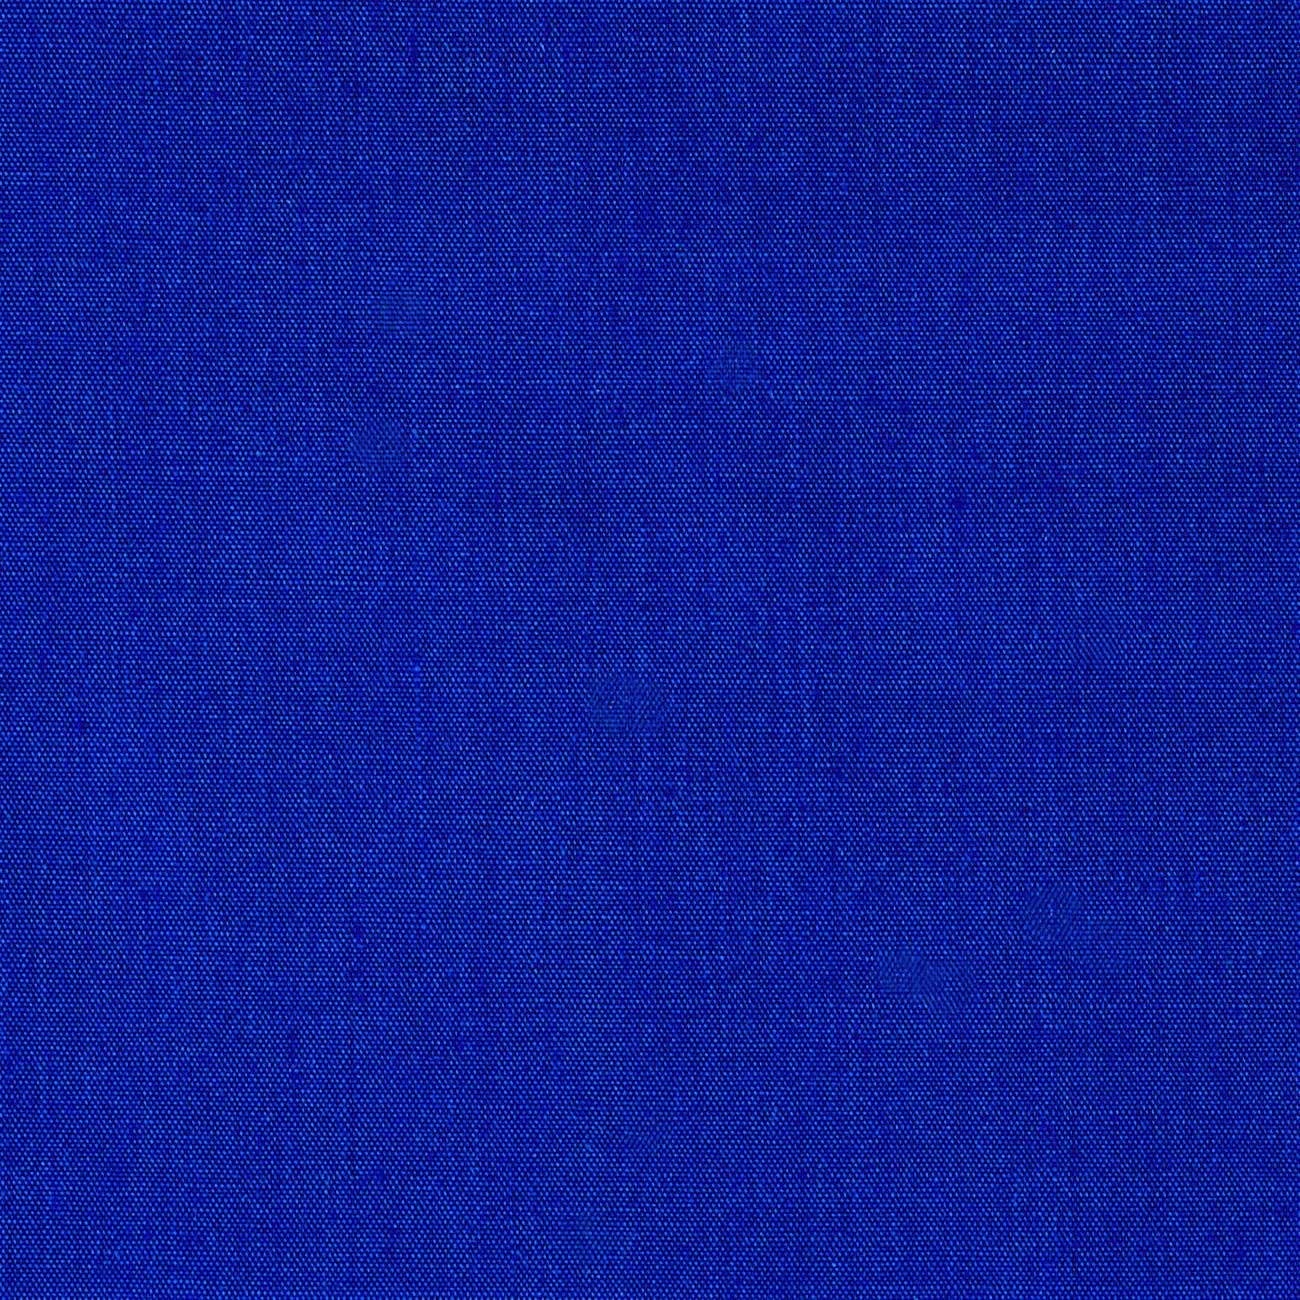 Premium Light Weight Poly Cotton Blend Broadcloth Fabric, Good to Make Face Mask Fabric (Royal Blue, 1 Yard)